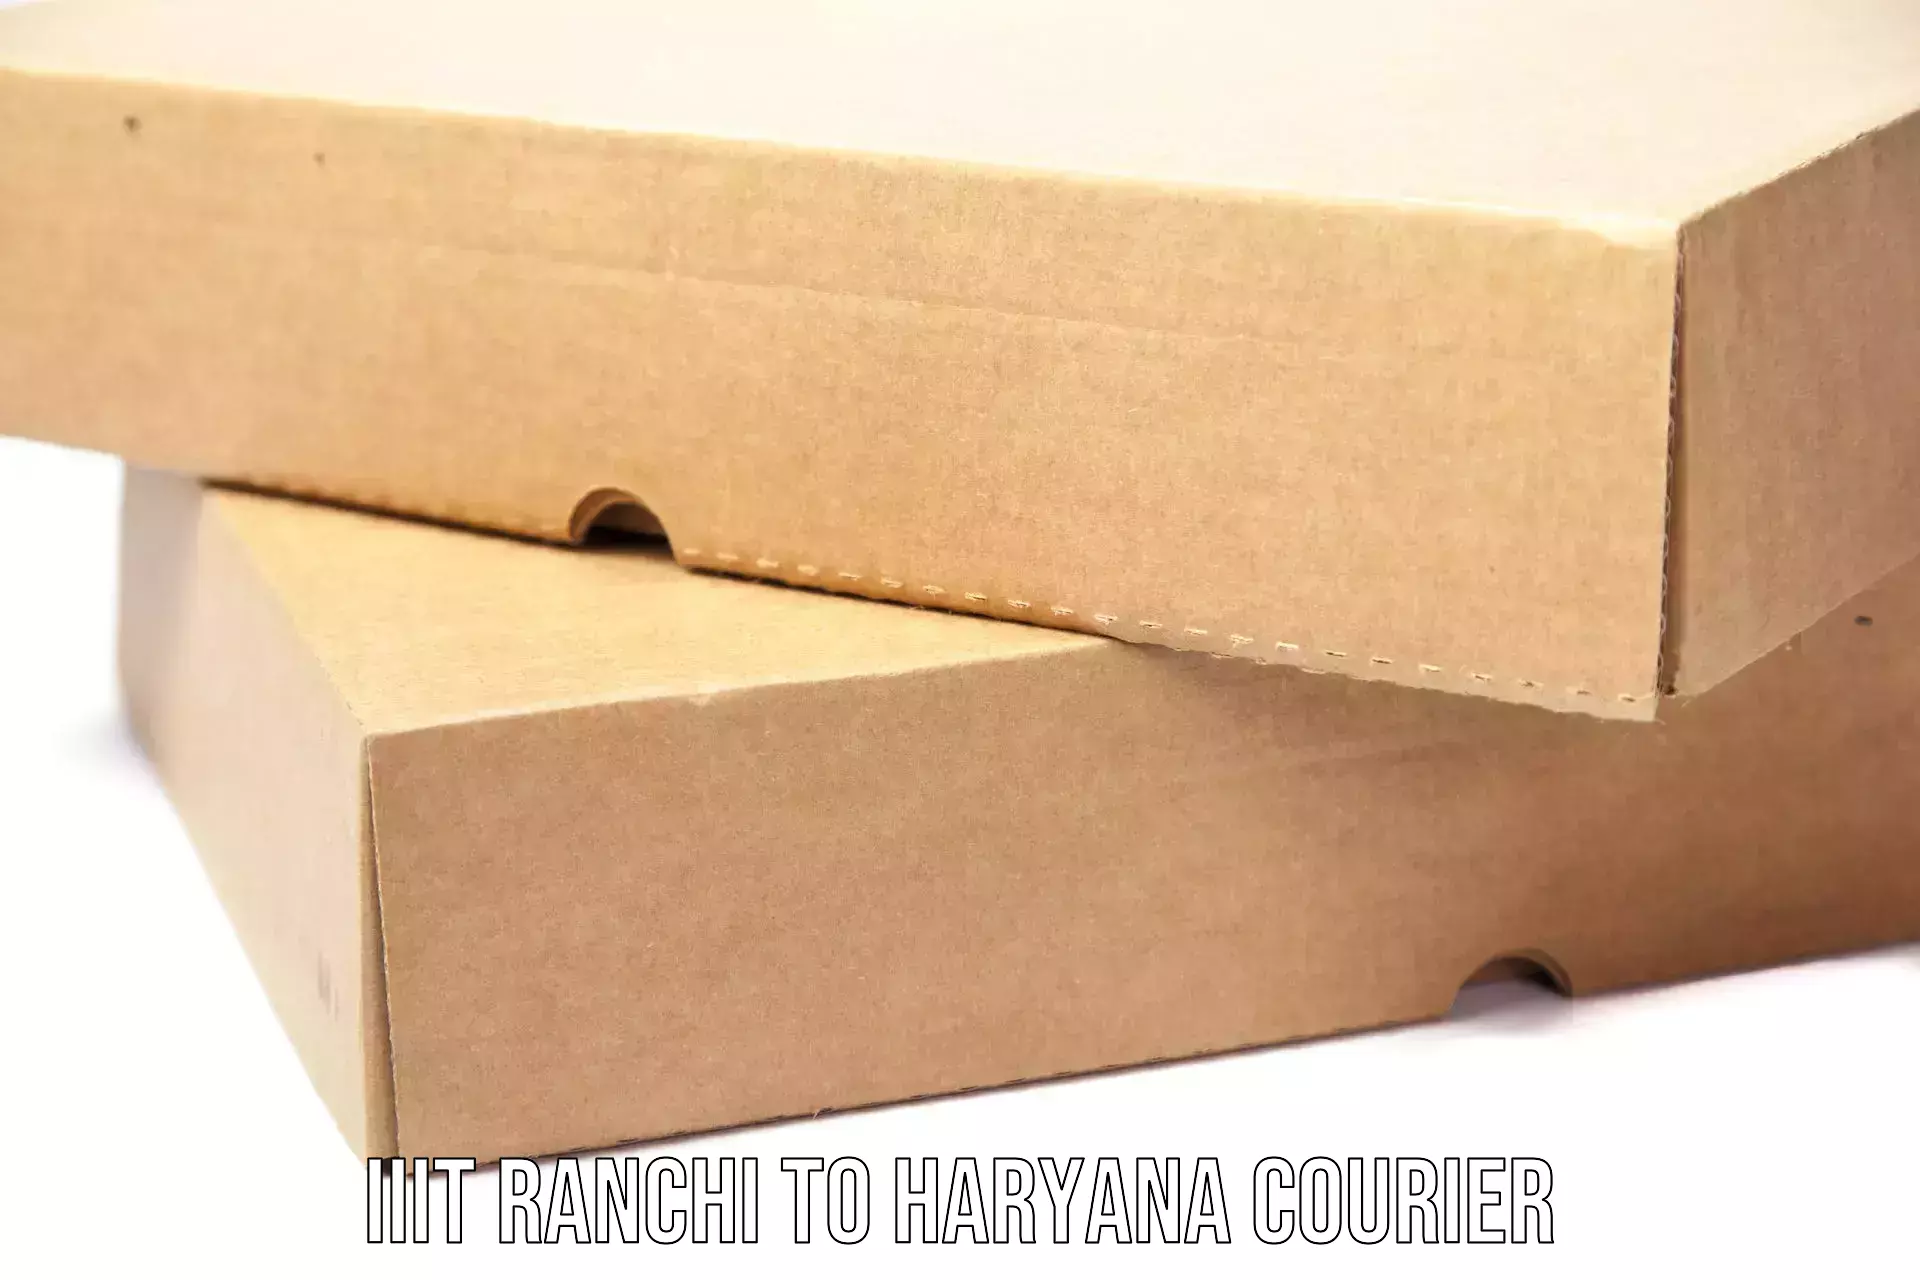 Courier tracking online IIIT Ranchi to Haryana